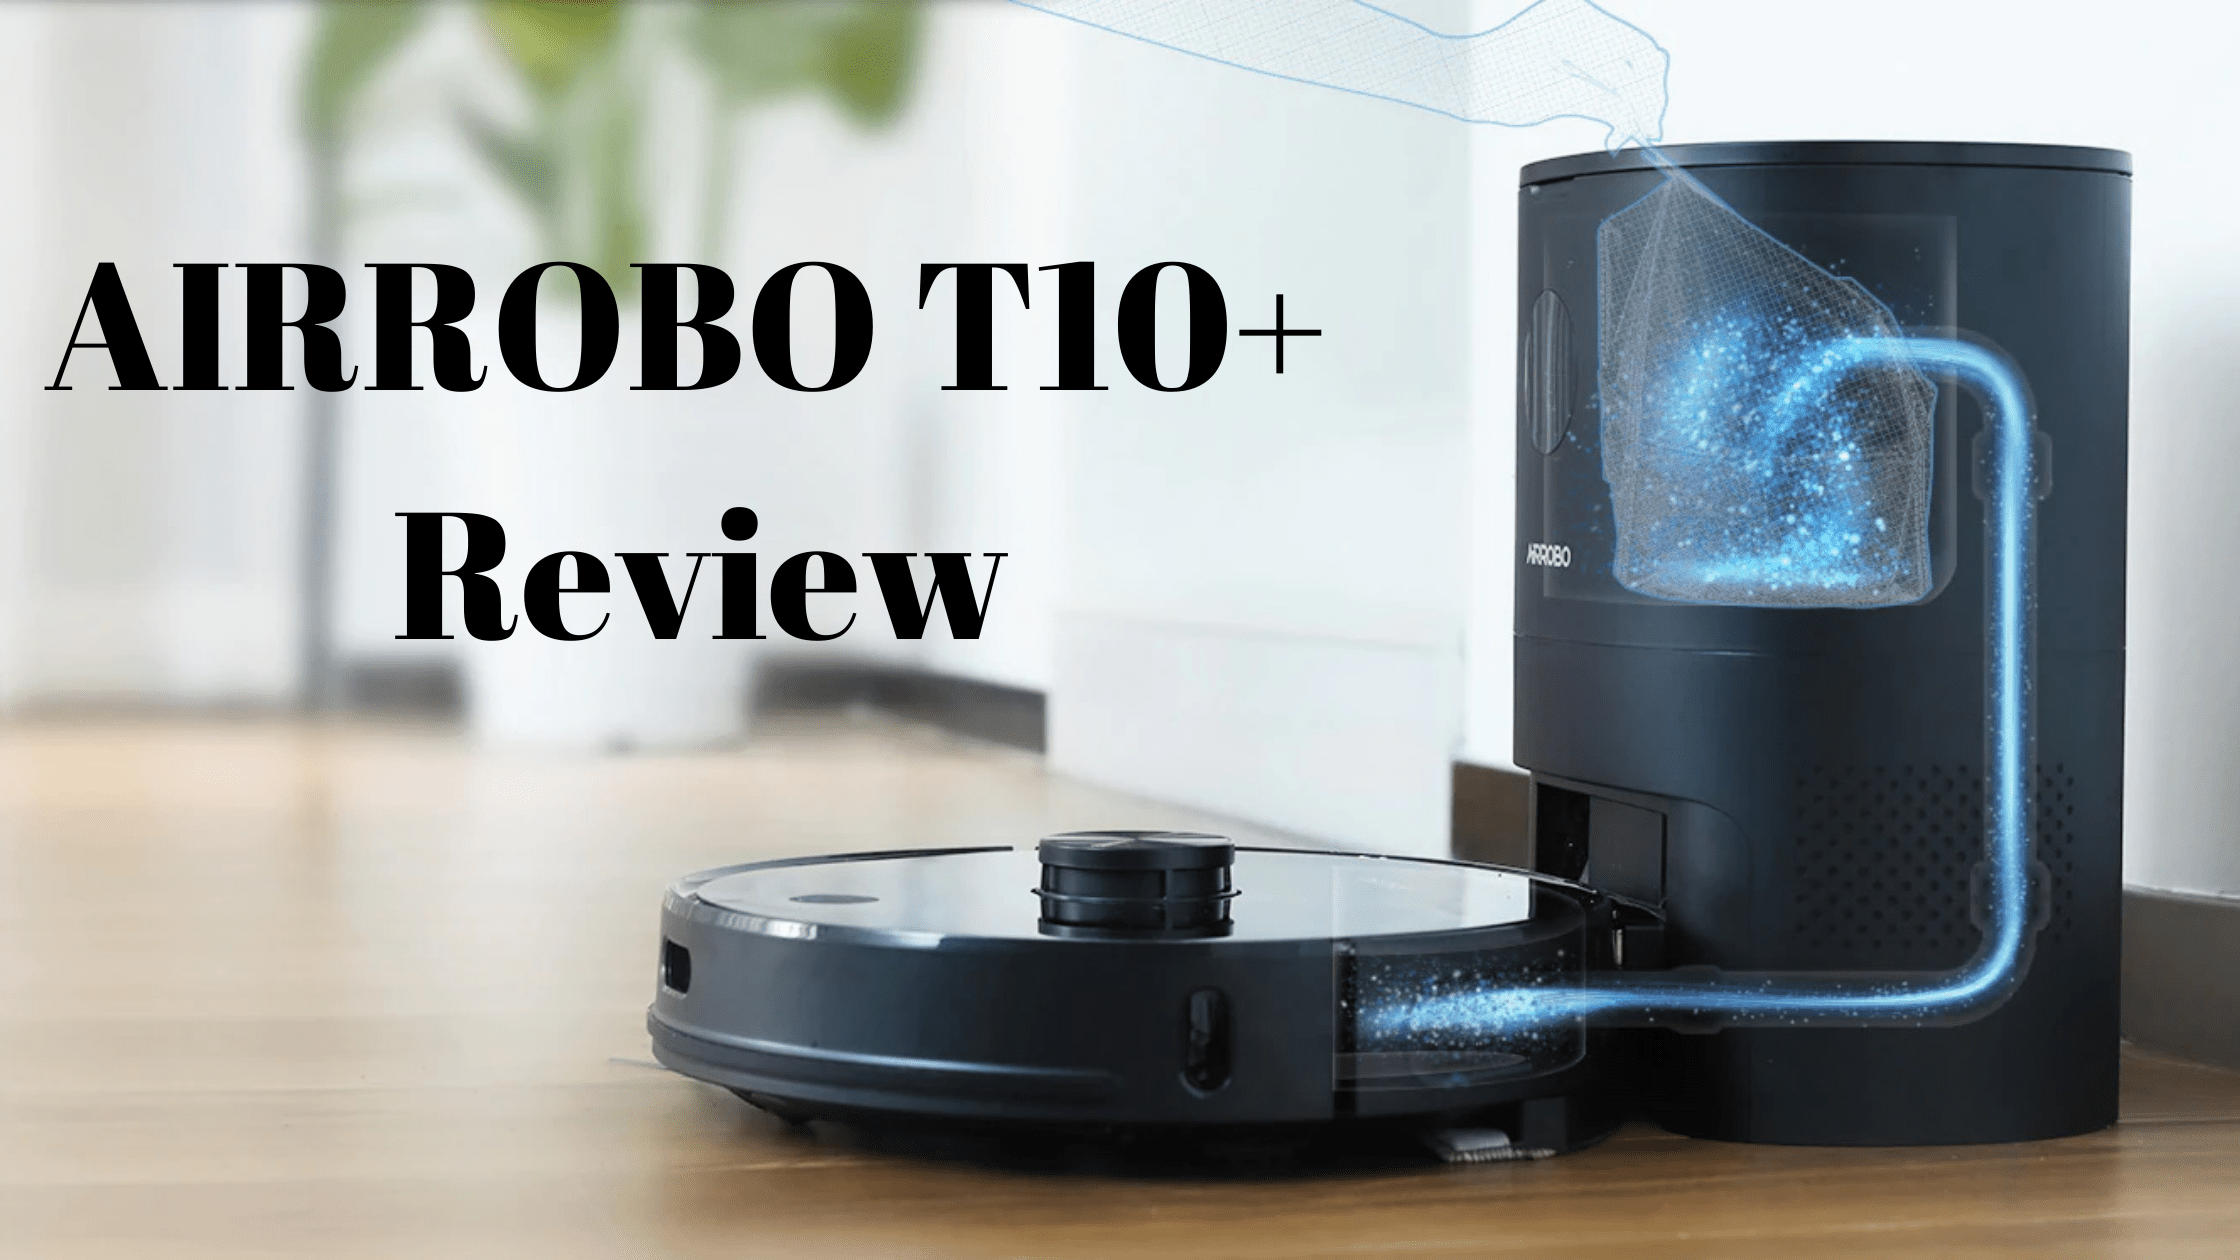 AIRROBO T10+ Self-Empty Robot Vacuum & Mop Review – The cheapest self-emptying smart mapping vacuum on Amazon